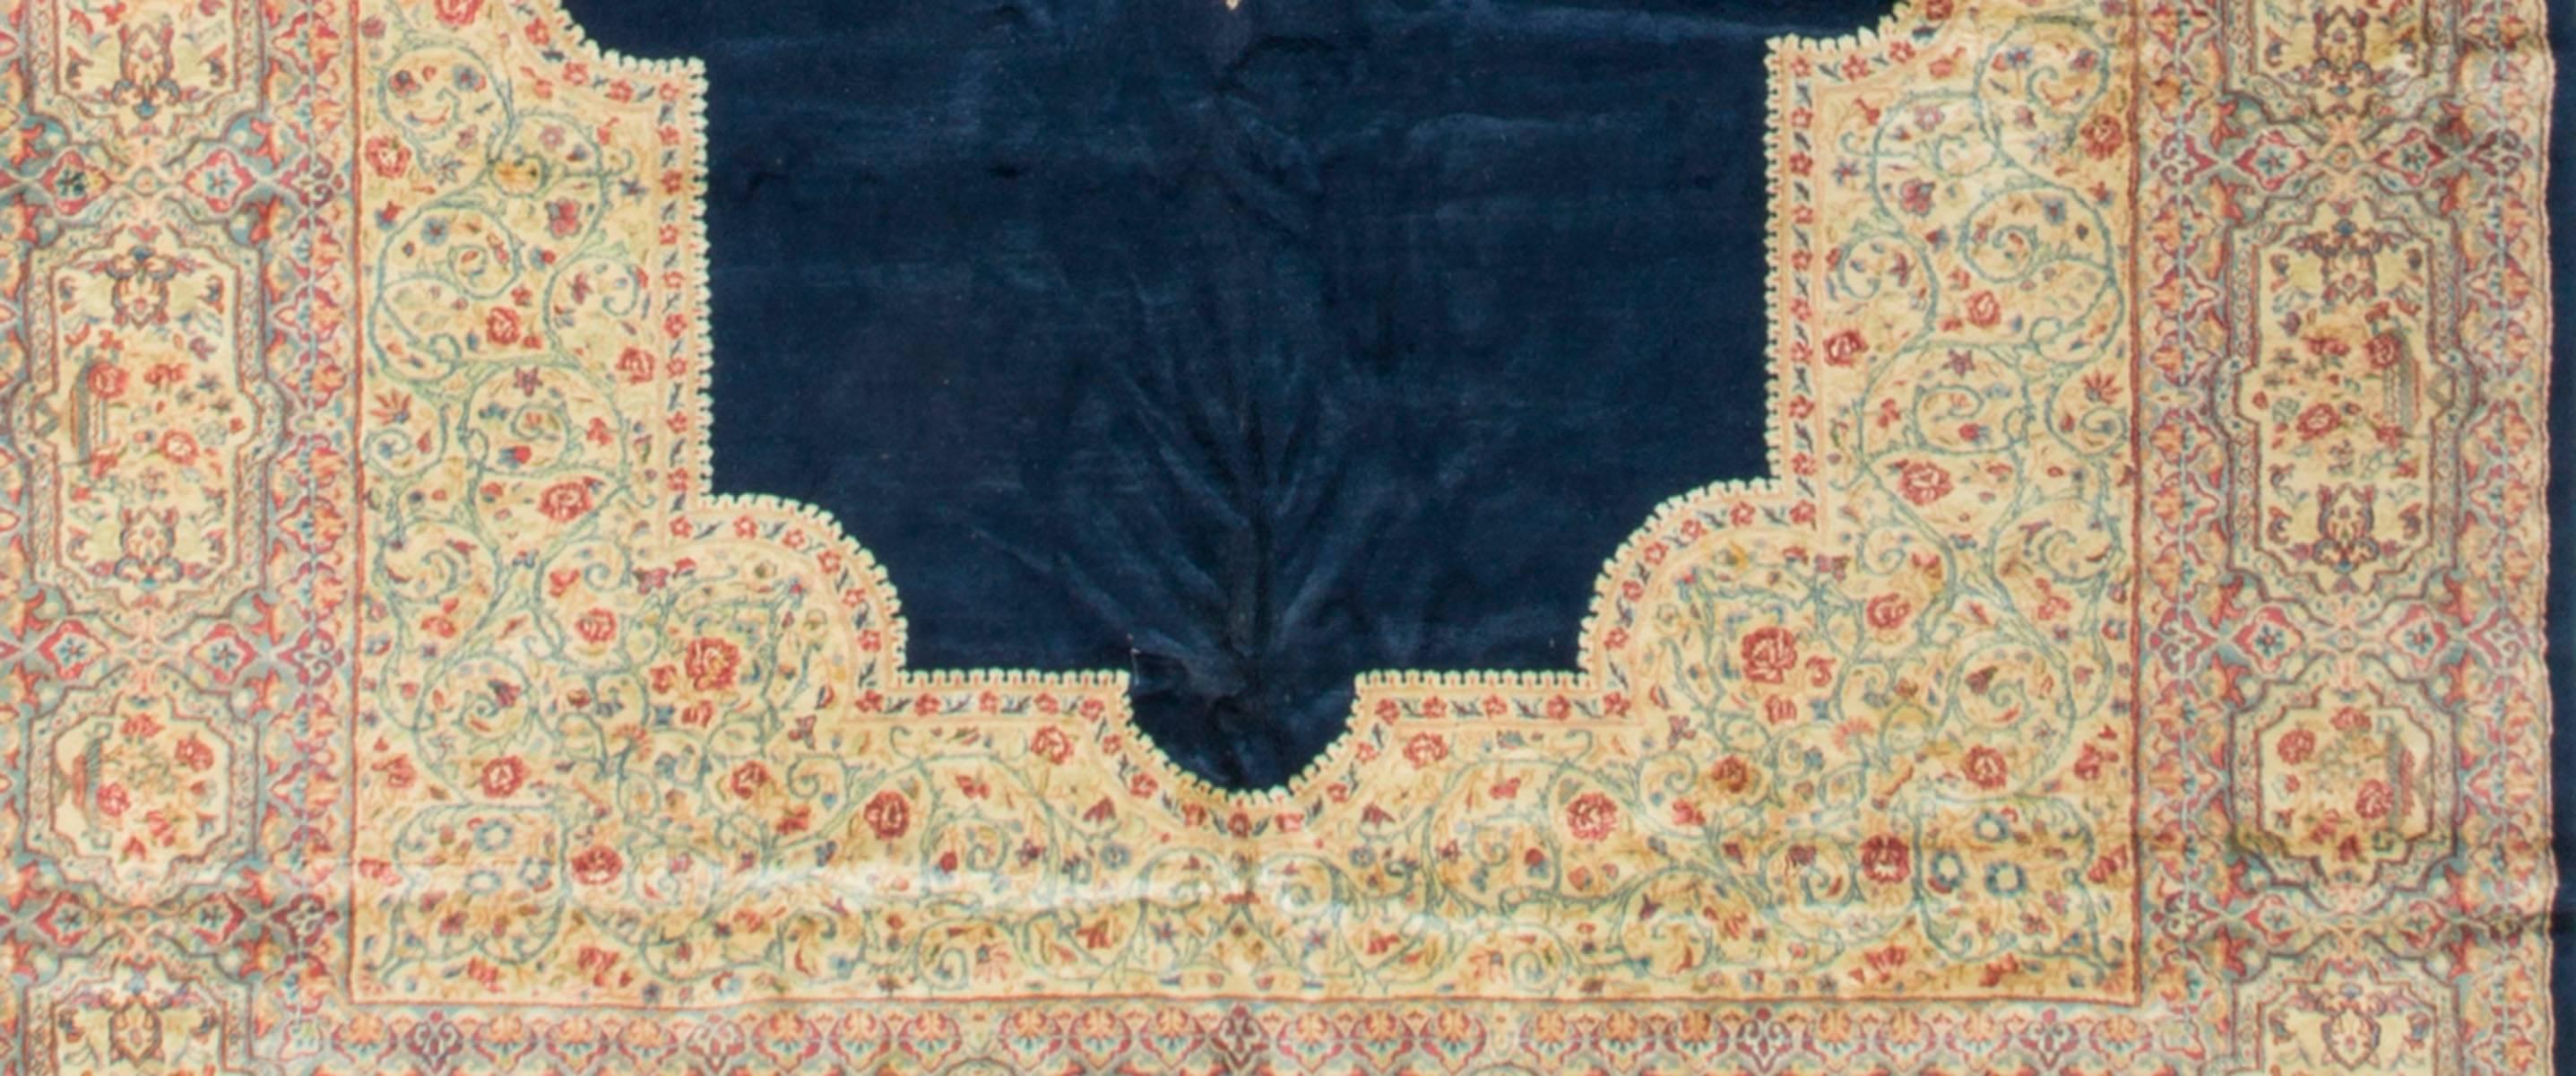 Vintage Oversize Persian Kirman Rug 9'9 x 17'10 In Good Condition For Sale In Secaucus, NJ